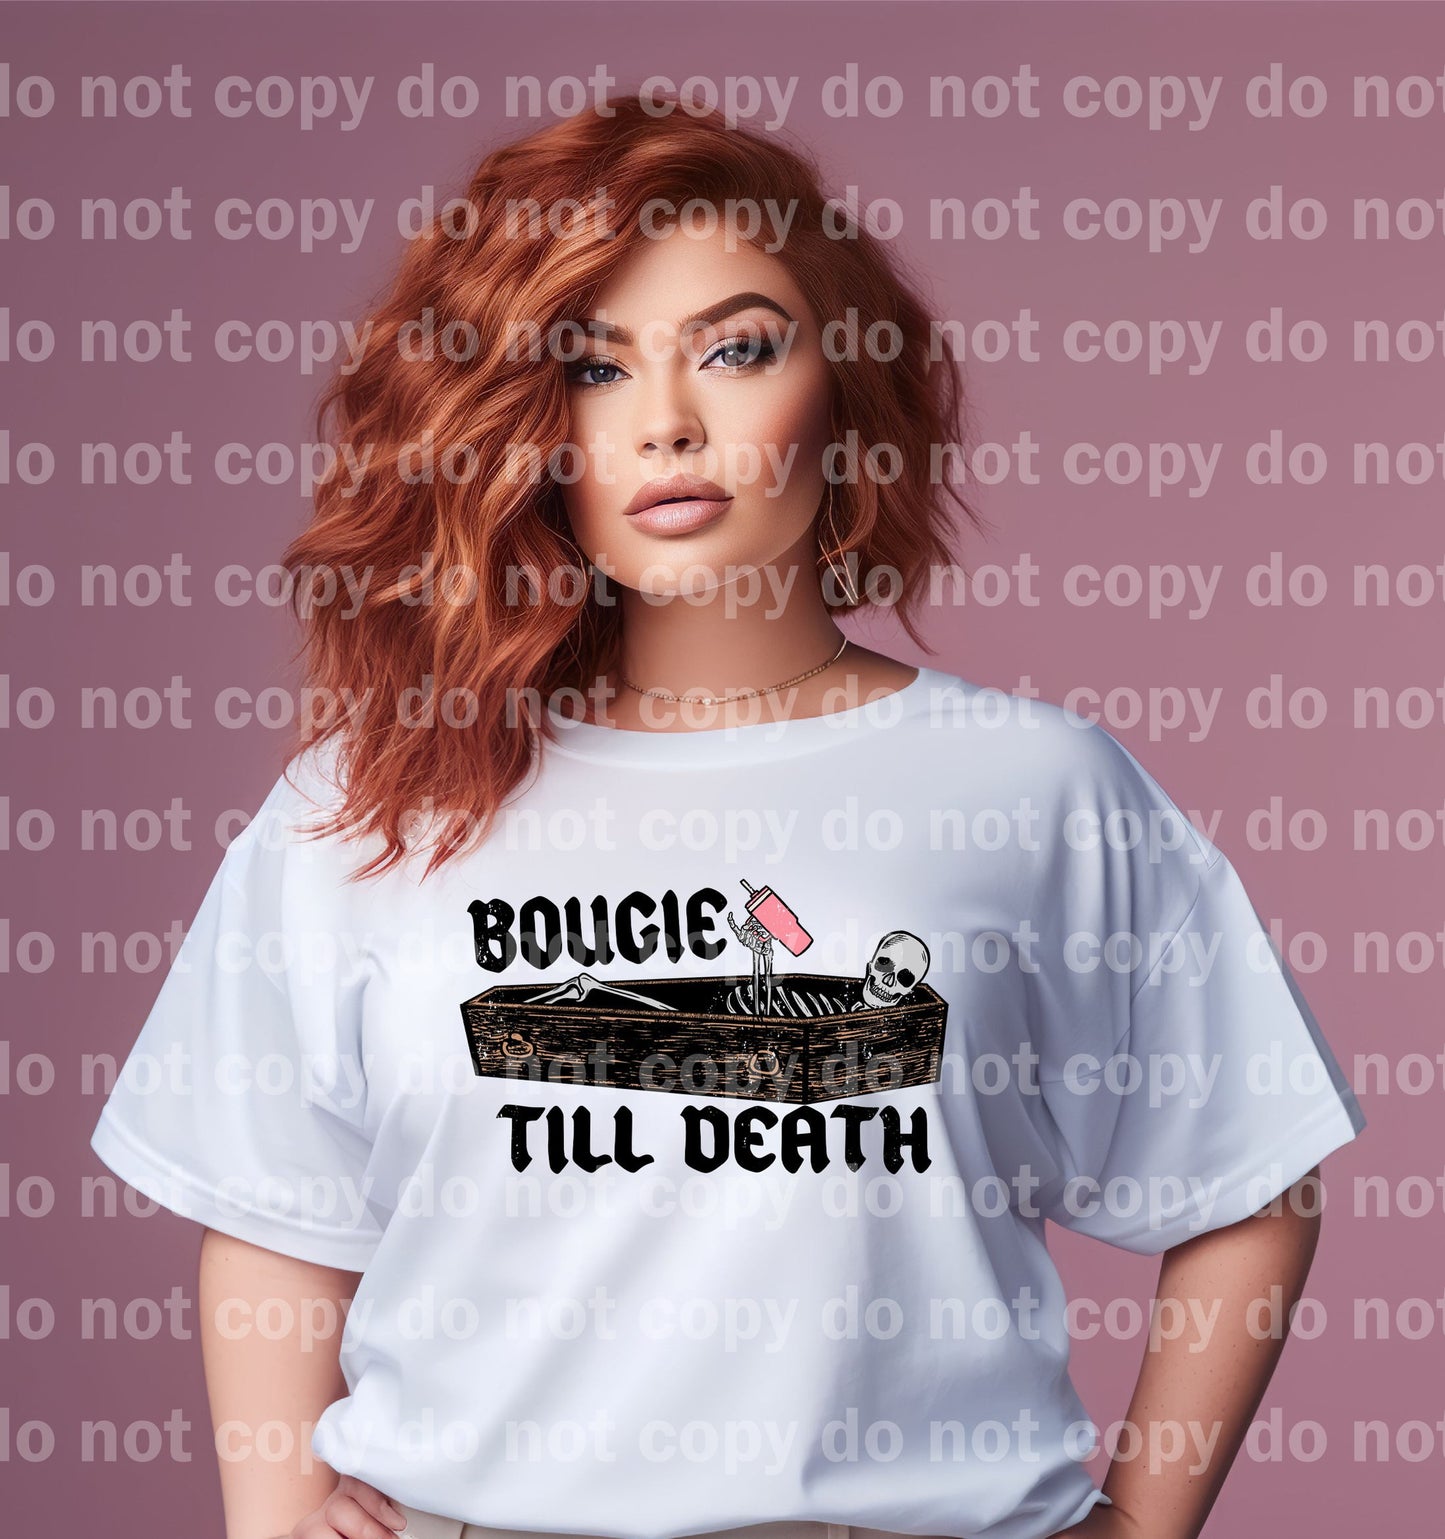 Bougie Till Death Distressed Full Color/One Color Dream Print or Sublimation Print